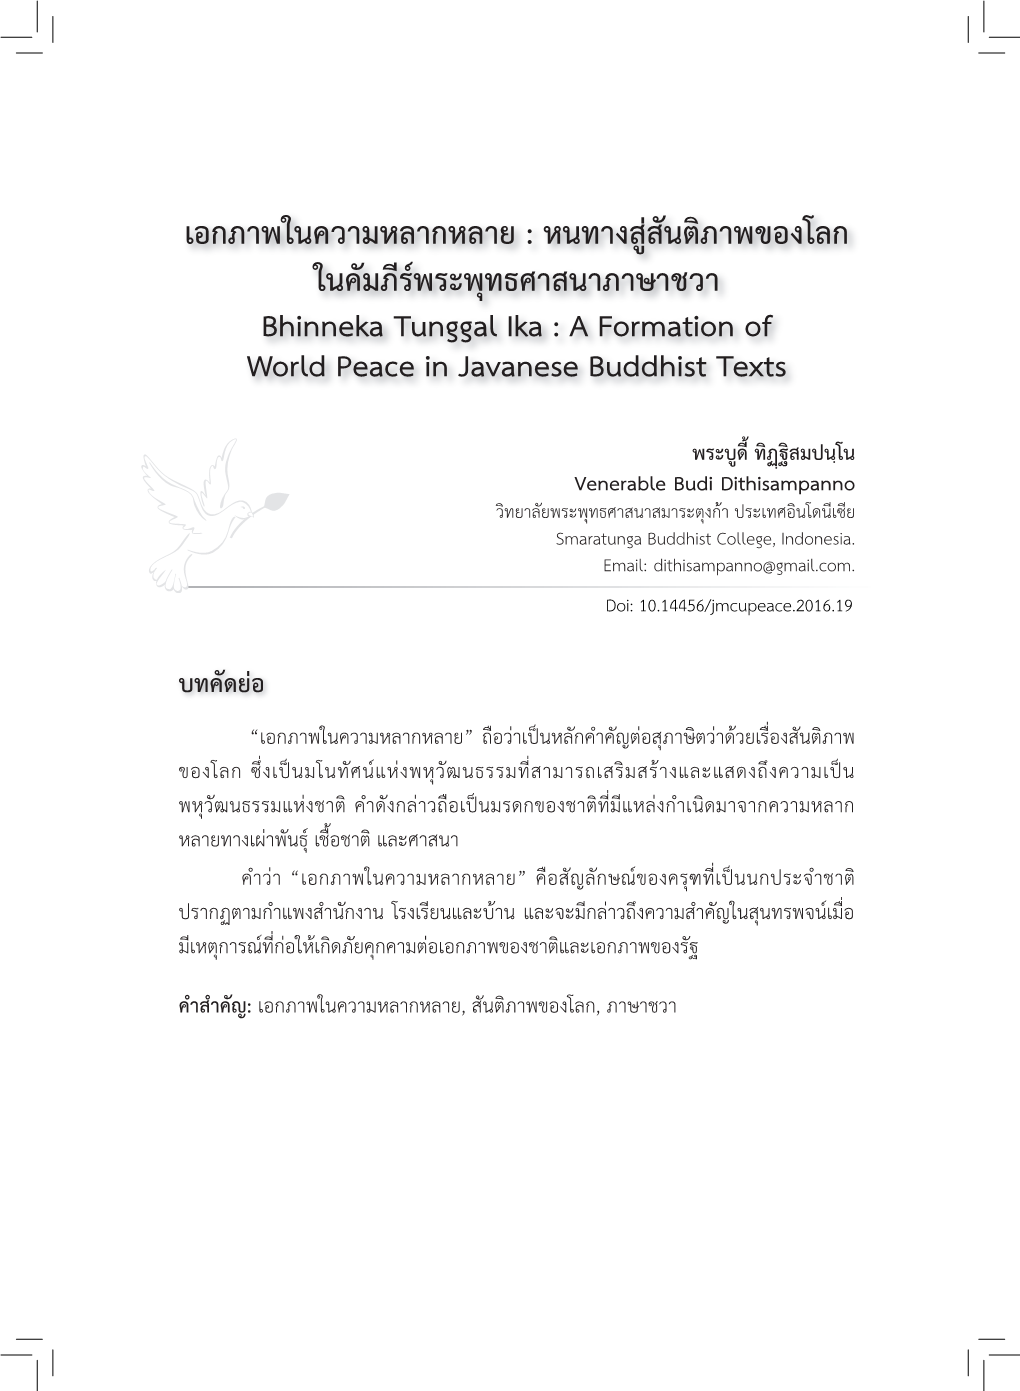 Bhinneka Tunggal Ika : a Formation of World Peace in Javanese Buddhist Texts